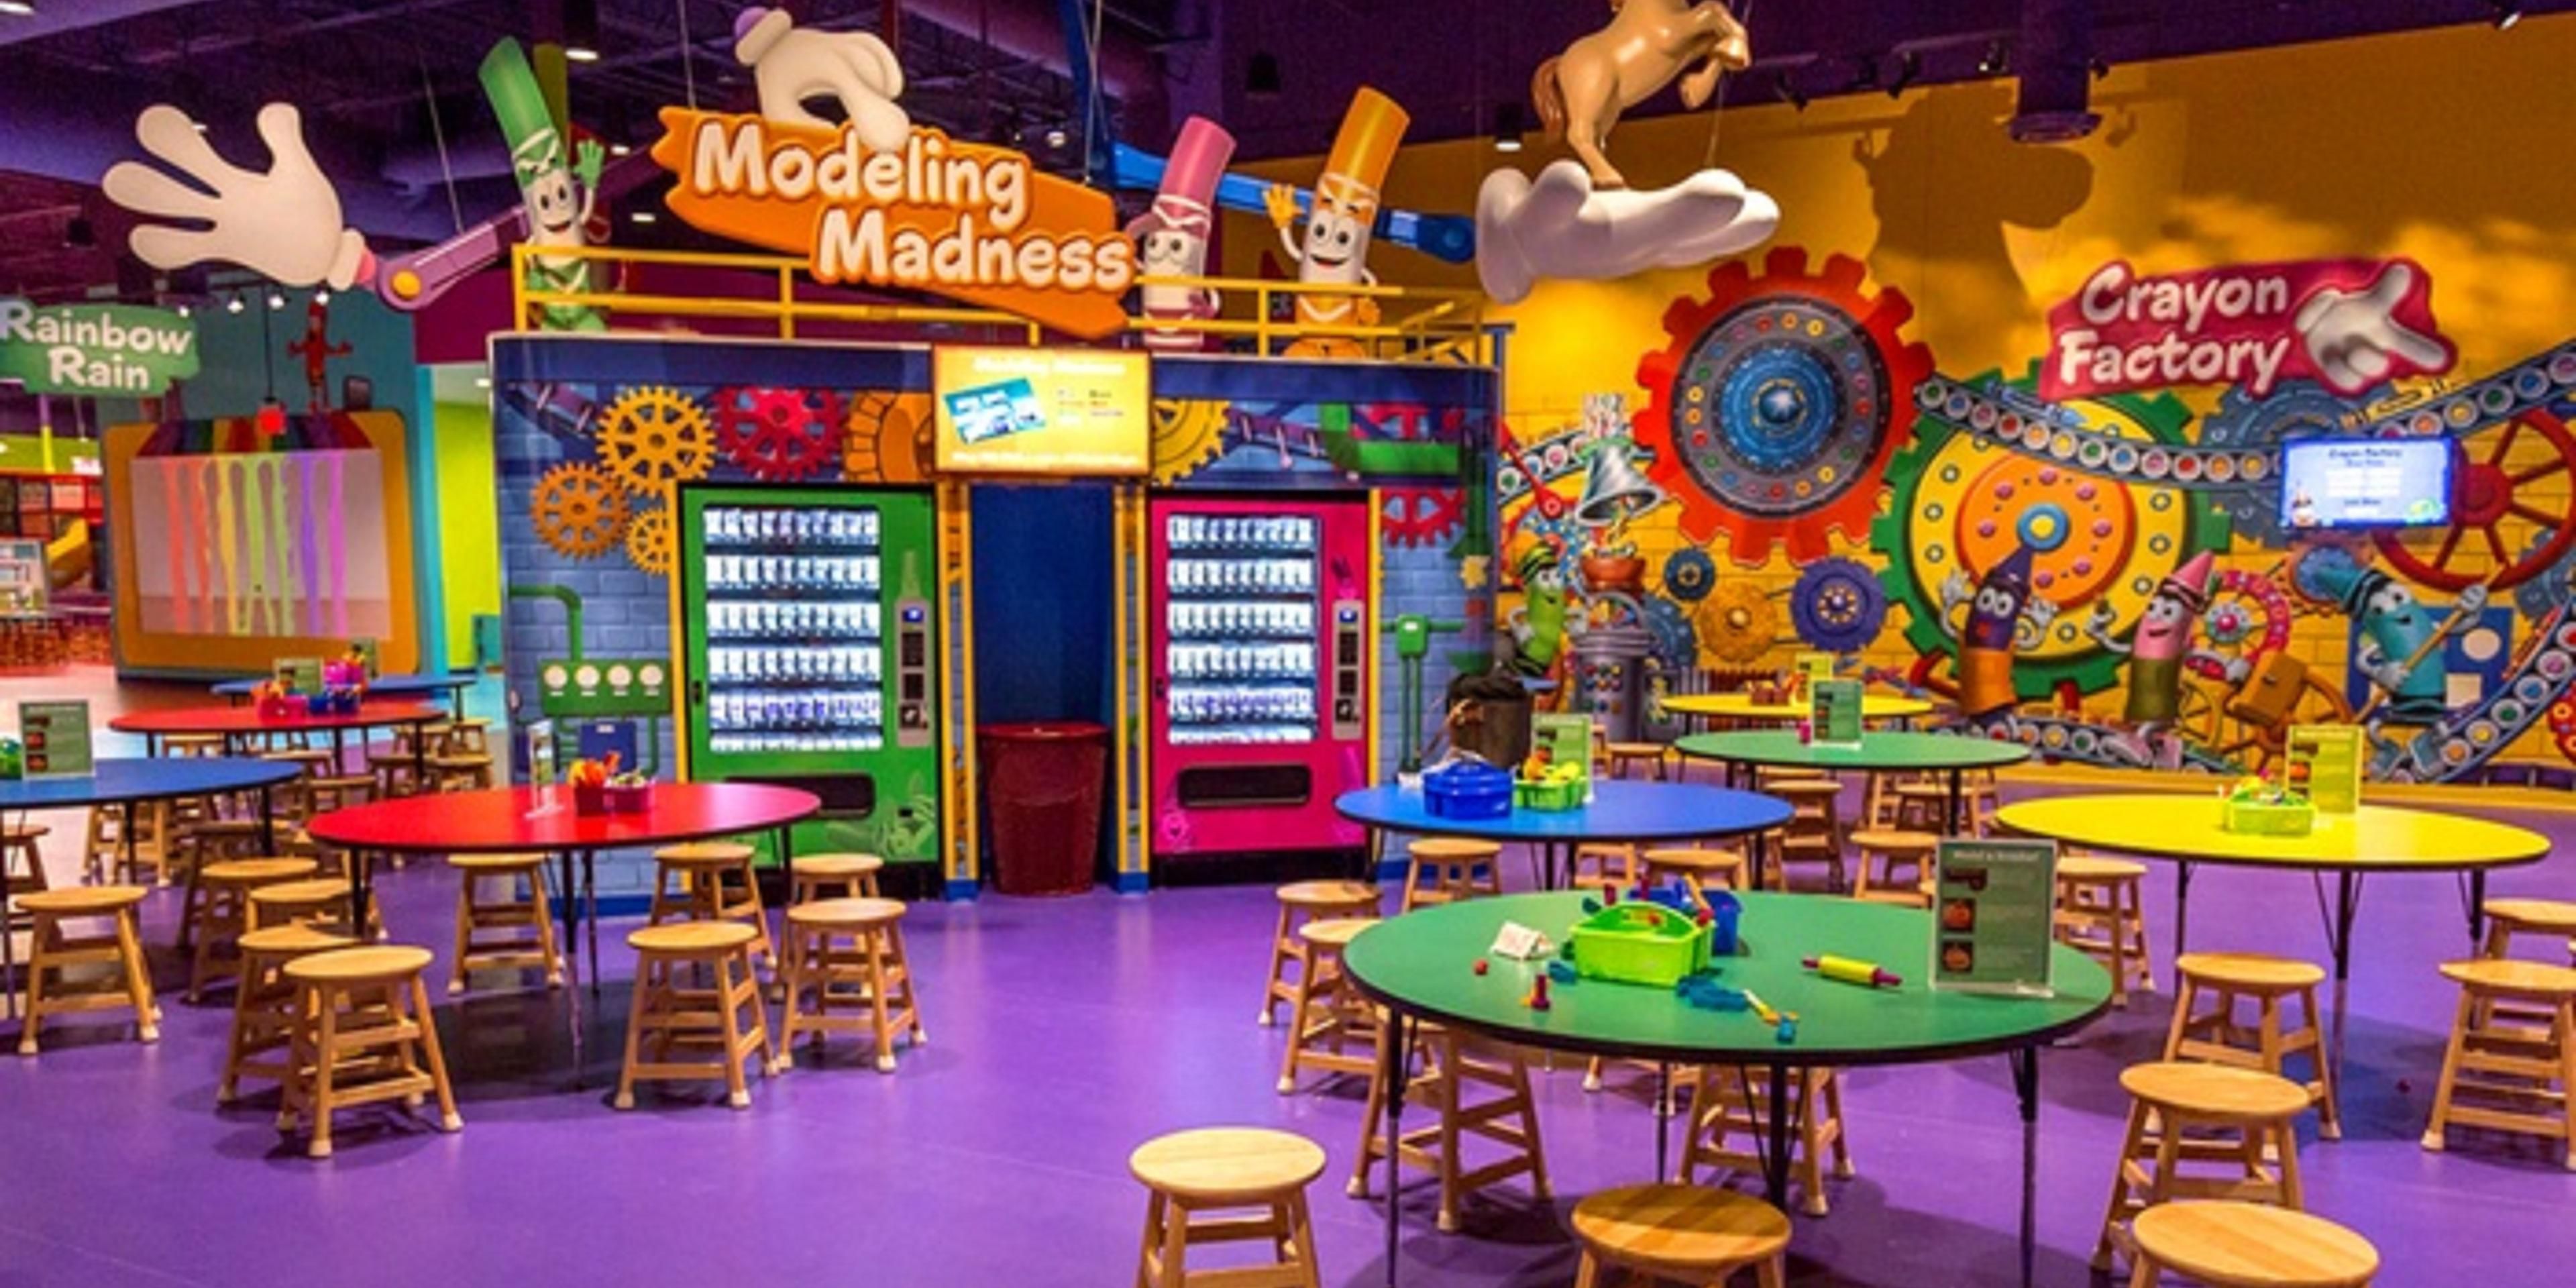 The Crayola Experience is the perfect experience for any family visiting the Bloomington area. With over 25 hands on activities and 60,000 square feet of space, this addition to the Mall of America is a unique and fun experience. Shuttle service available to the Mall of America.